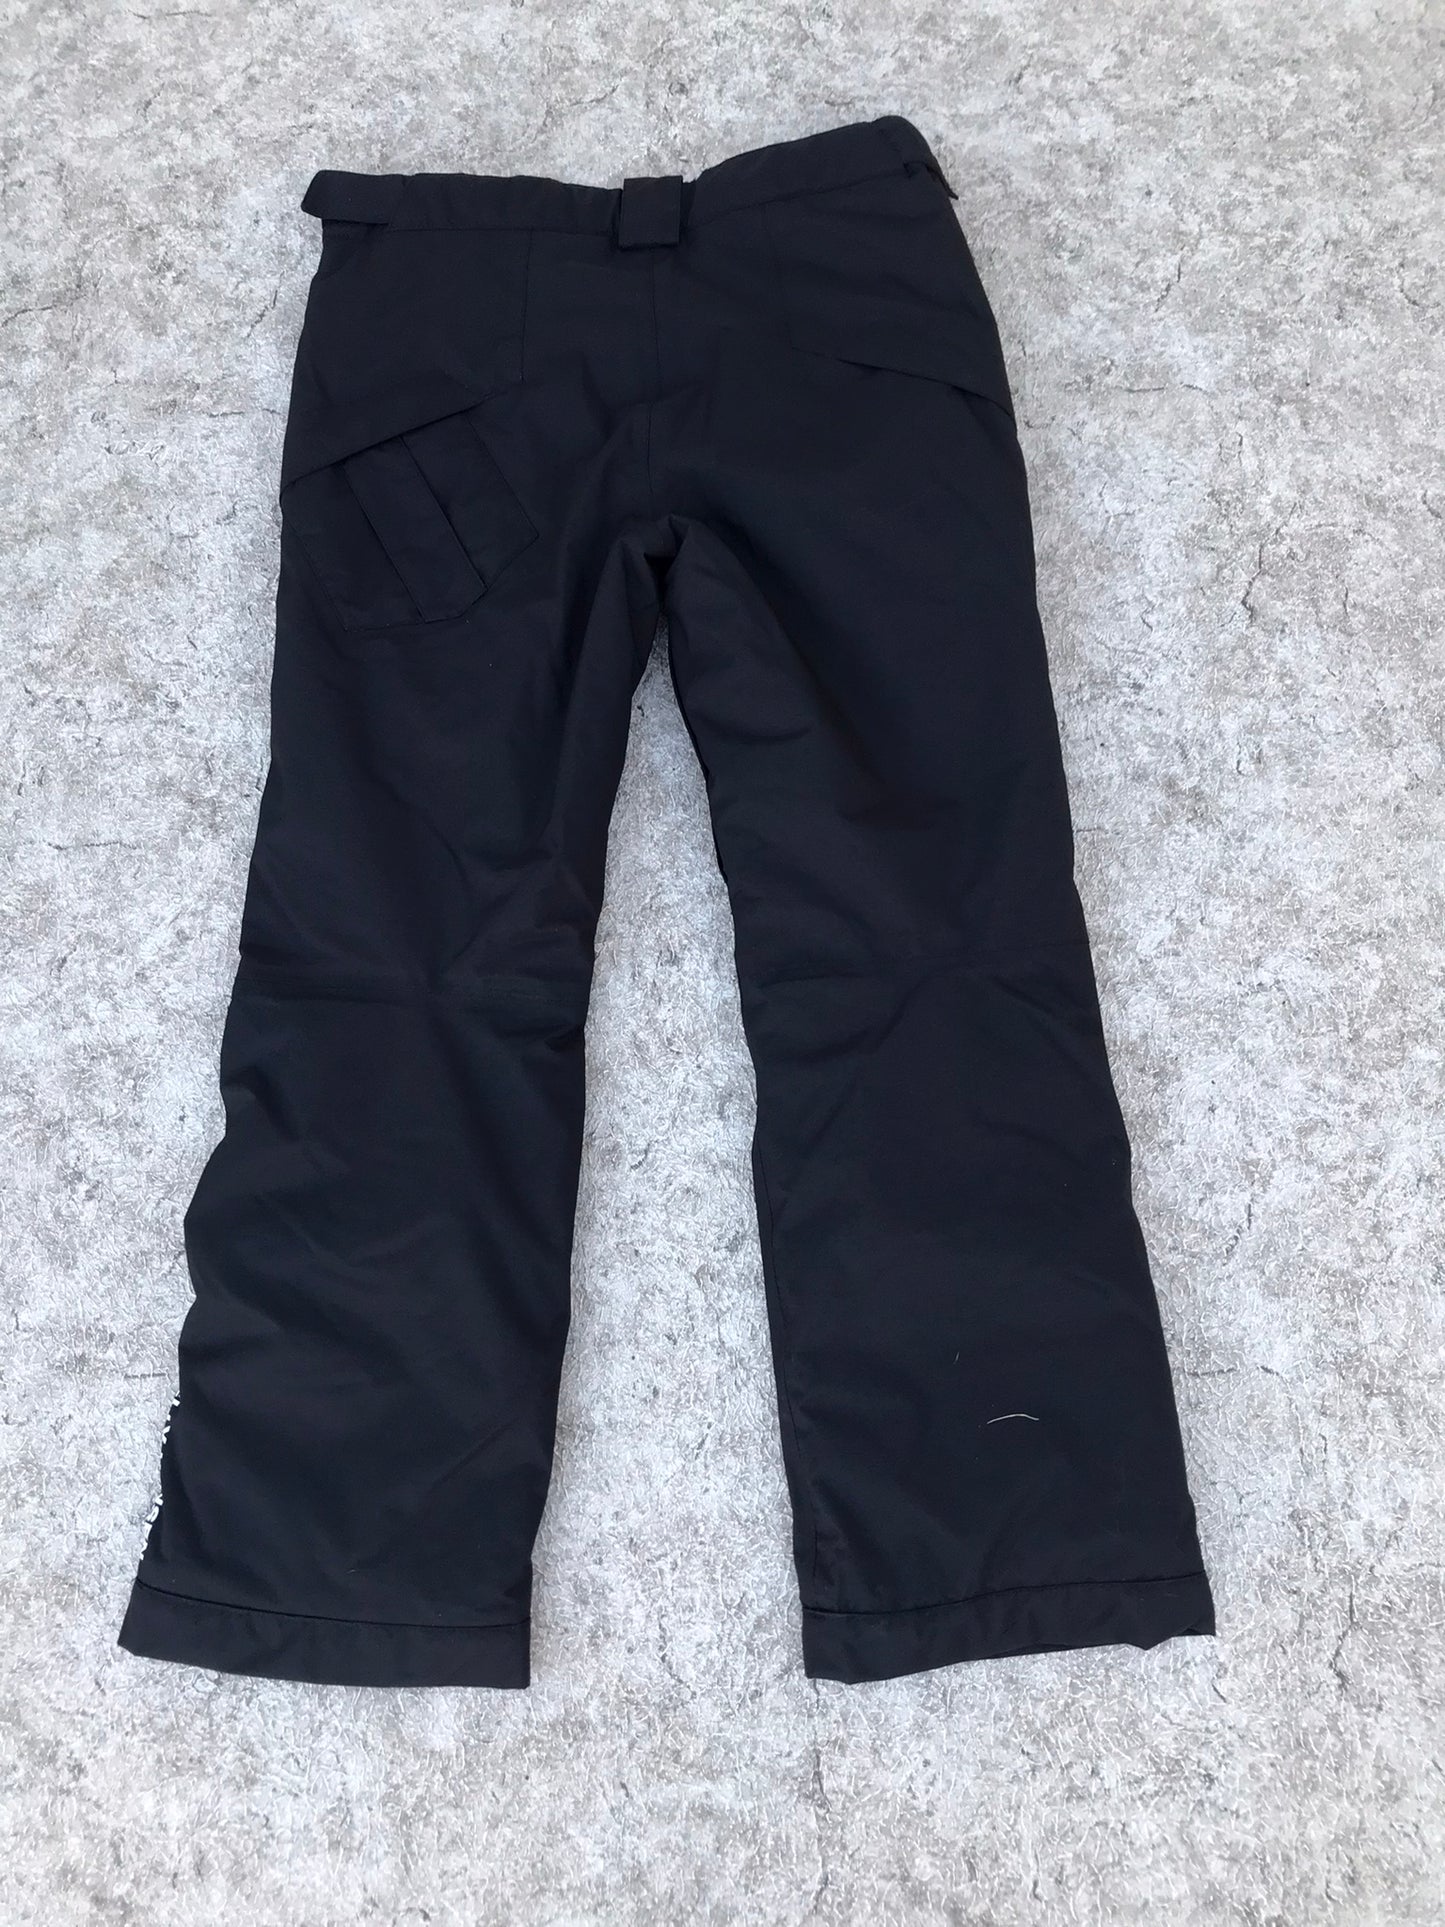 Snow Pants Child Size 14 Helly Hansen Waterproof  Black Outstanding Quality  New